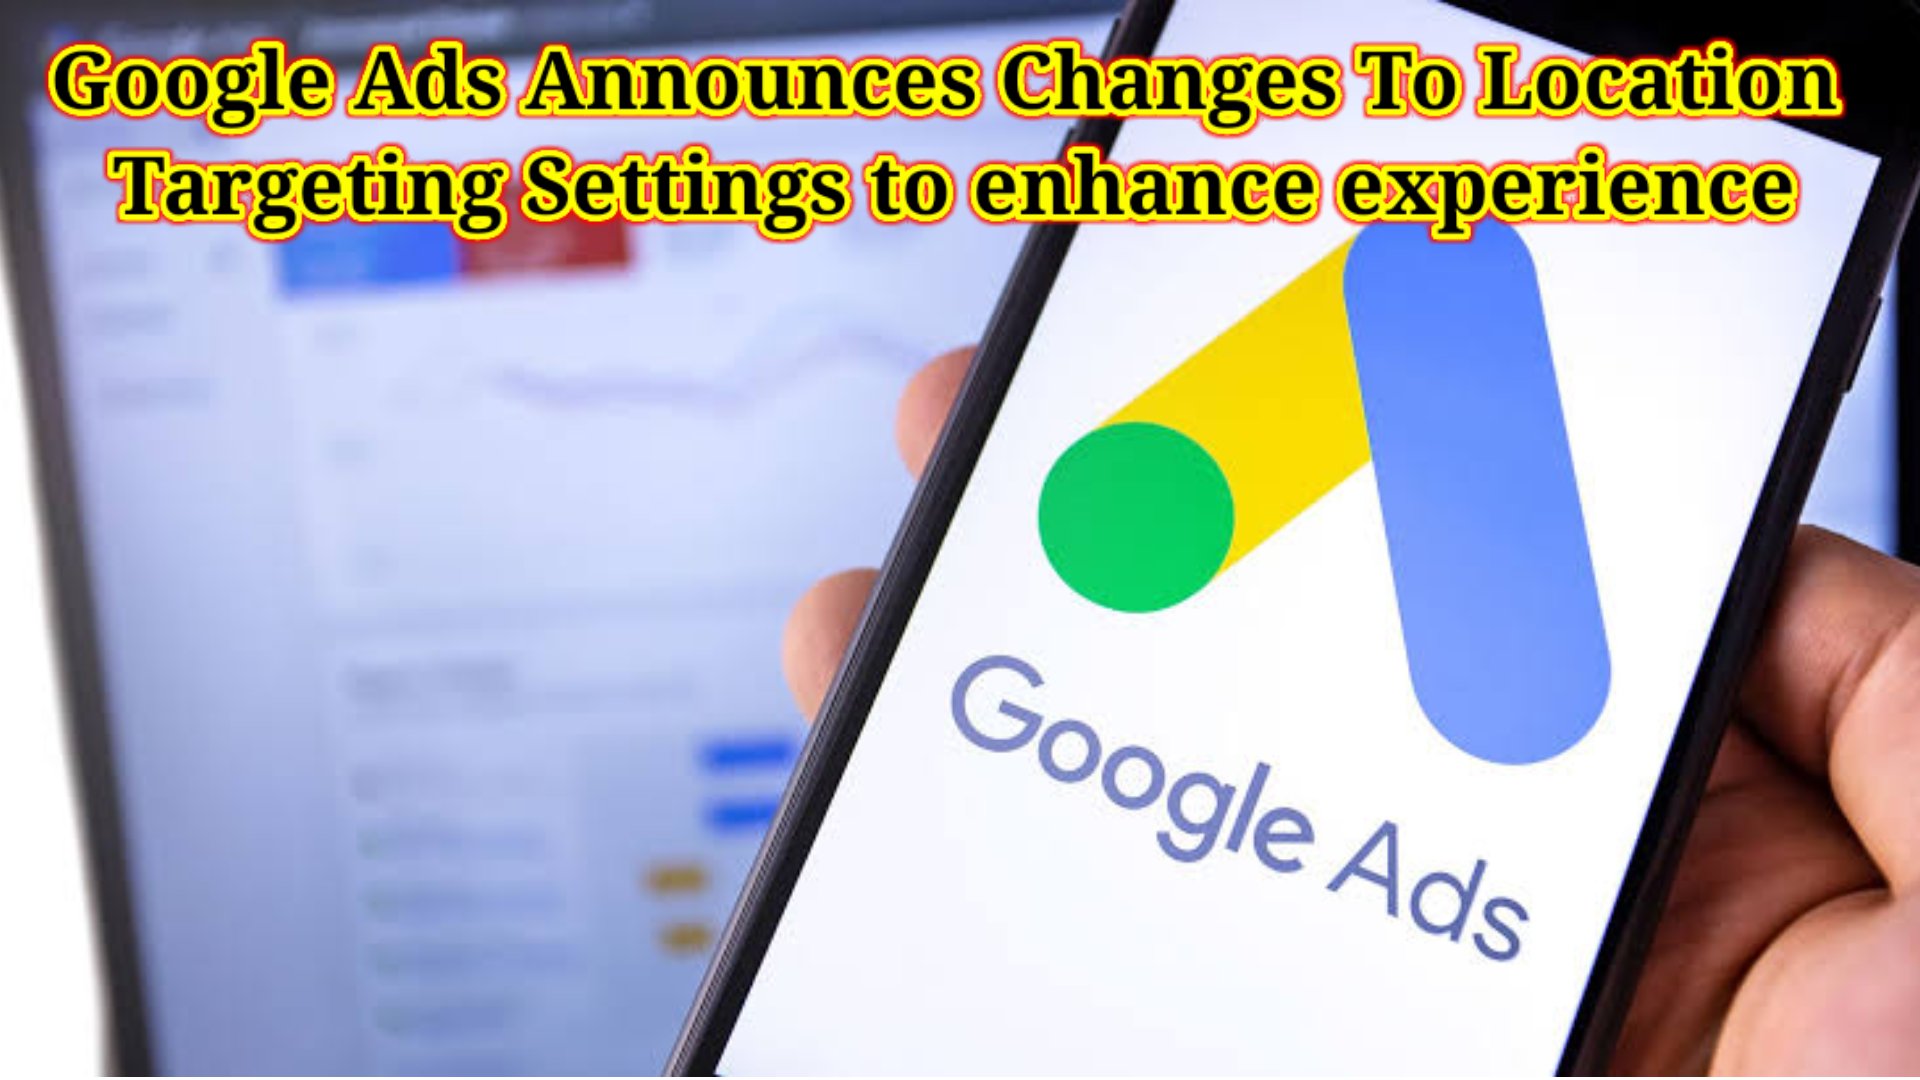 Google Ads Announces Changes To Location Targeting Settings to enhance experience